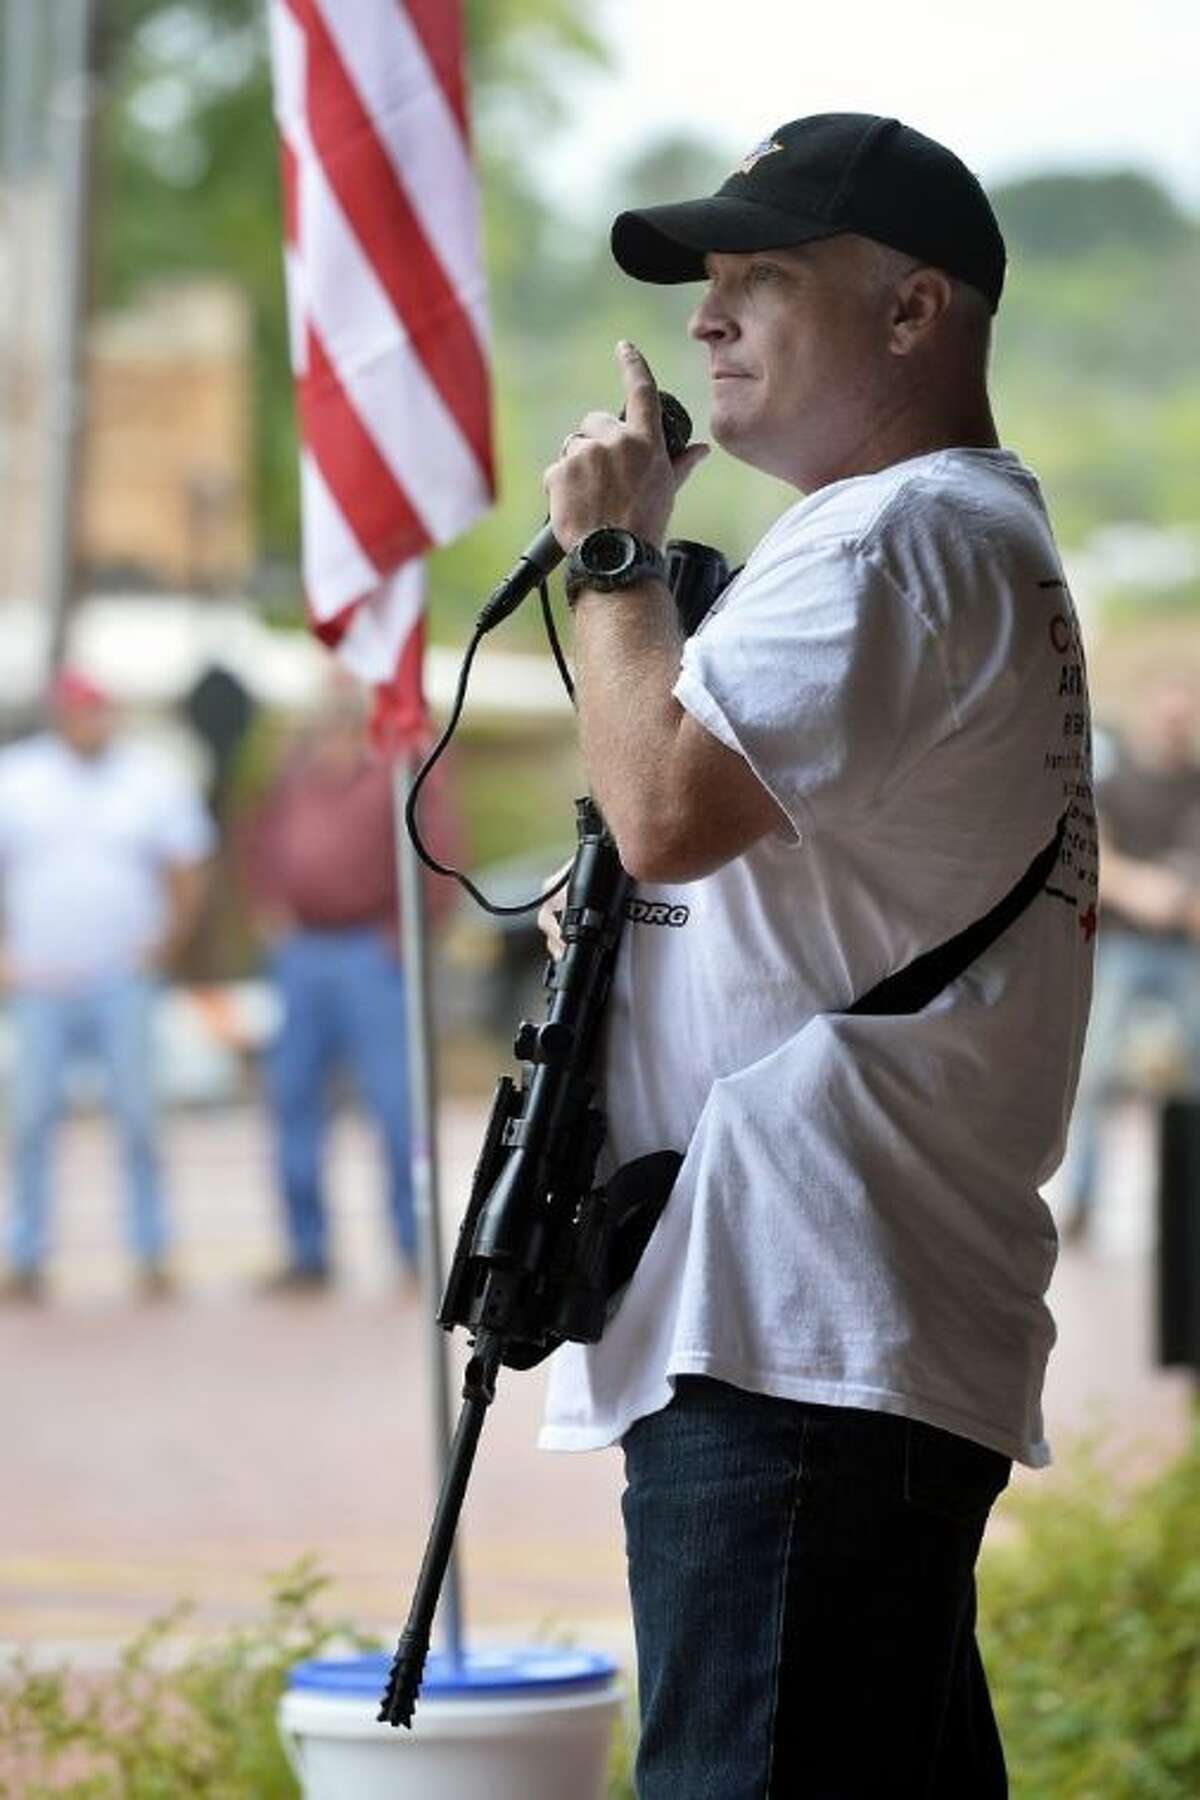 In this Sept. 21 file photo, Army Master Sgt. C.J. Grisham from Temple speaks during the “Come and Take It” rally, hosted by the Sons of Liberty Texas group, in downtown Nacogdoches. Grisham, who’s stationed at Fort Hood, was arrested by Temple police on March 16 while hiking with his son, and his AR-15 rifle.